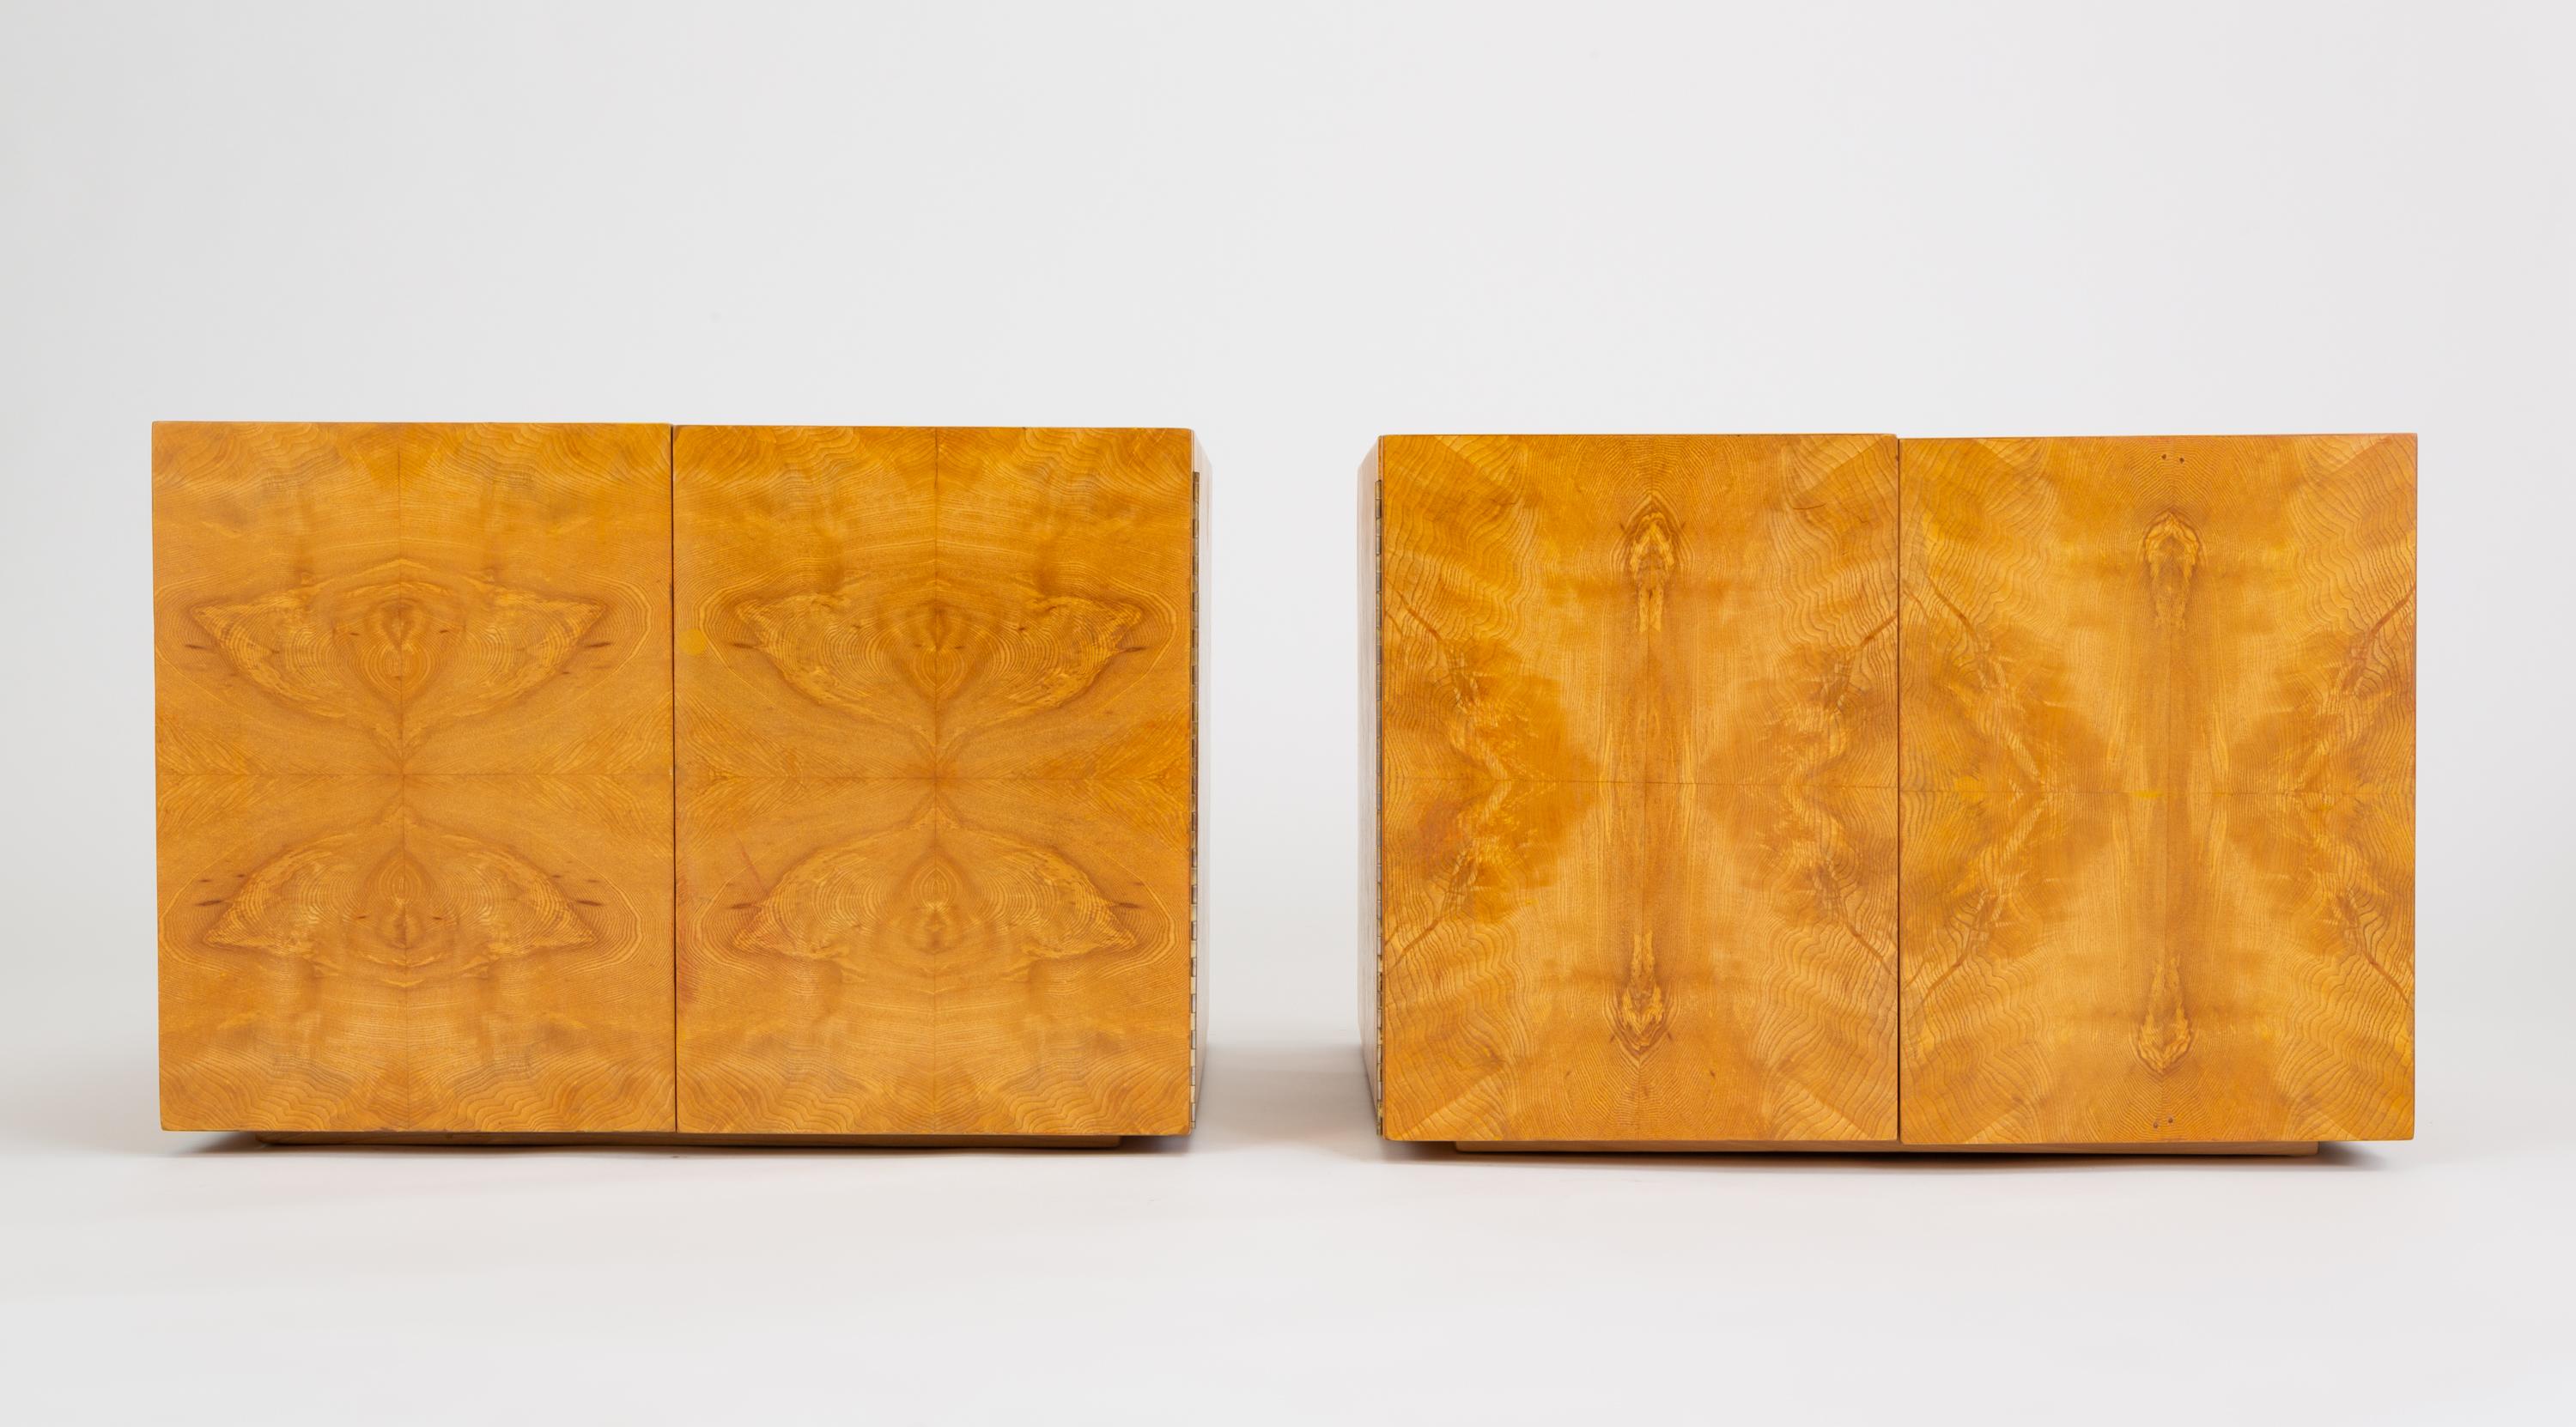 A versatile pair of storage pieces or side tables have a simple design, distinguished by the highly figured, bookmatched burl wood that decorates their surfaces. The front of each pieces opens at two plain-faced doors with hidden magnetic latches.